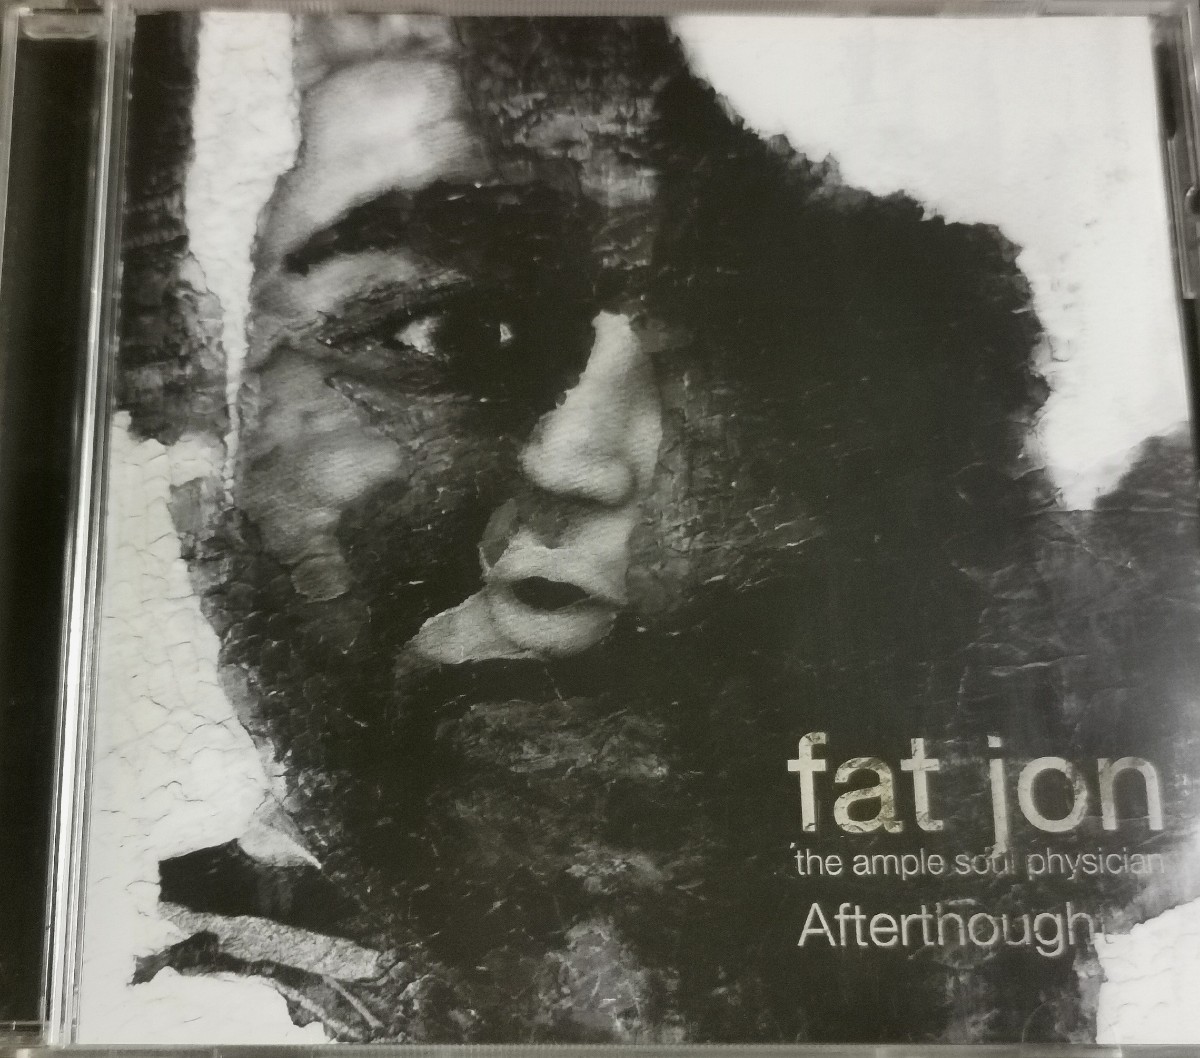 【FAT JON/AFTERTHOUGHT】 FIVE DEEZ/輸入盤CD_画像1